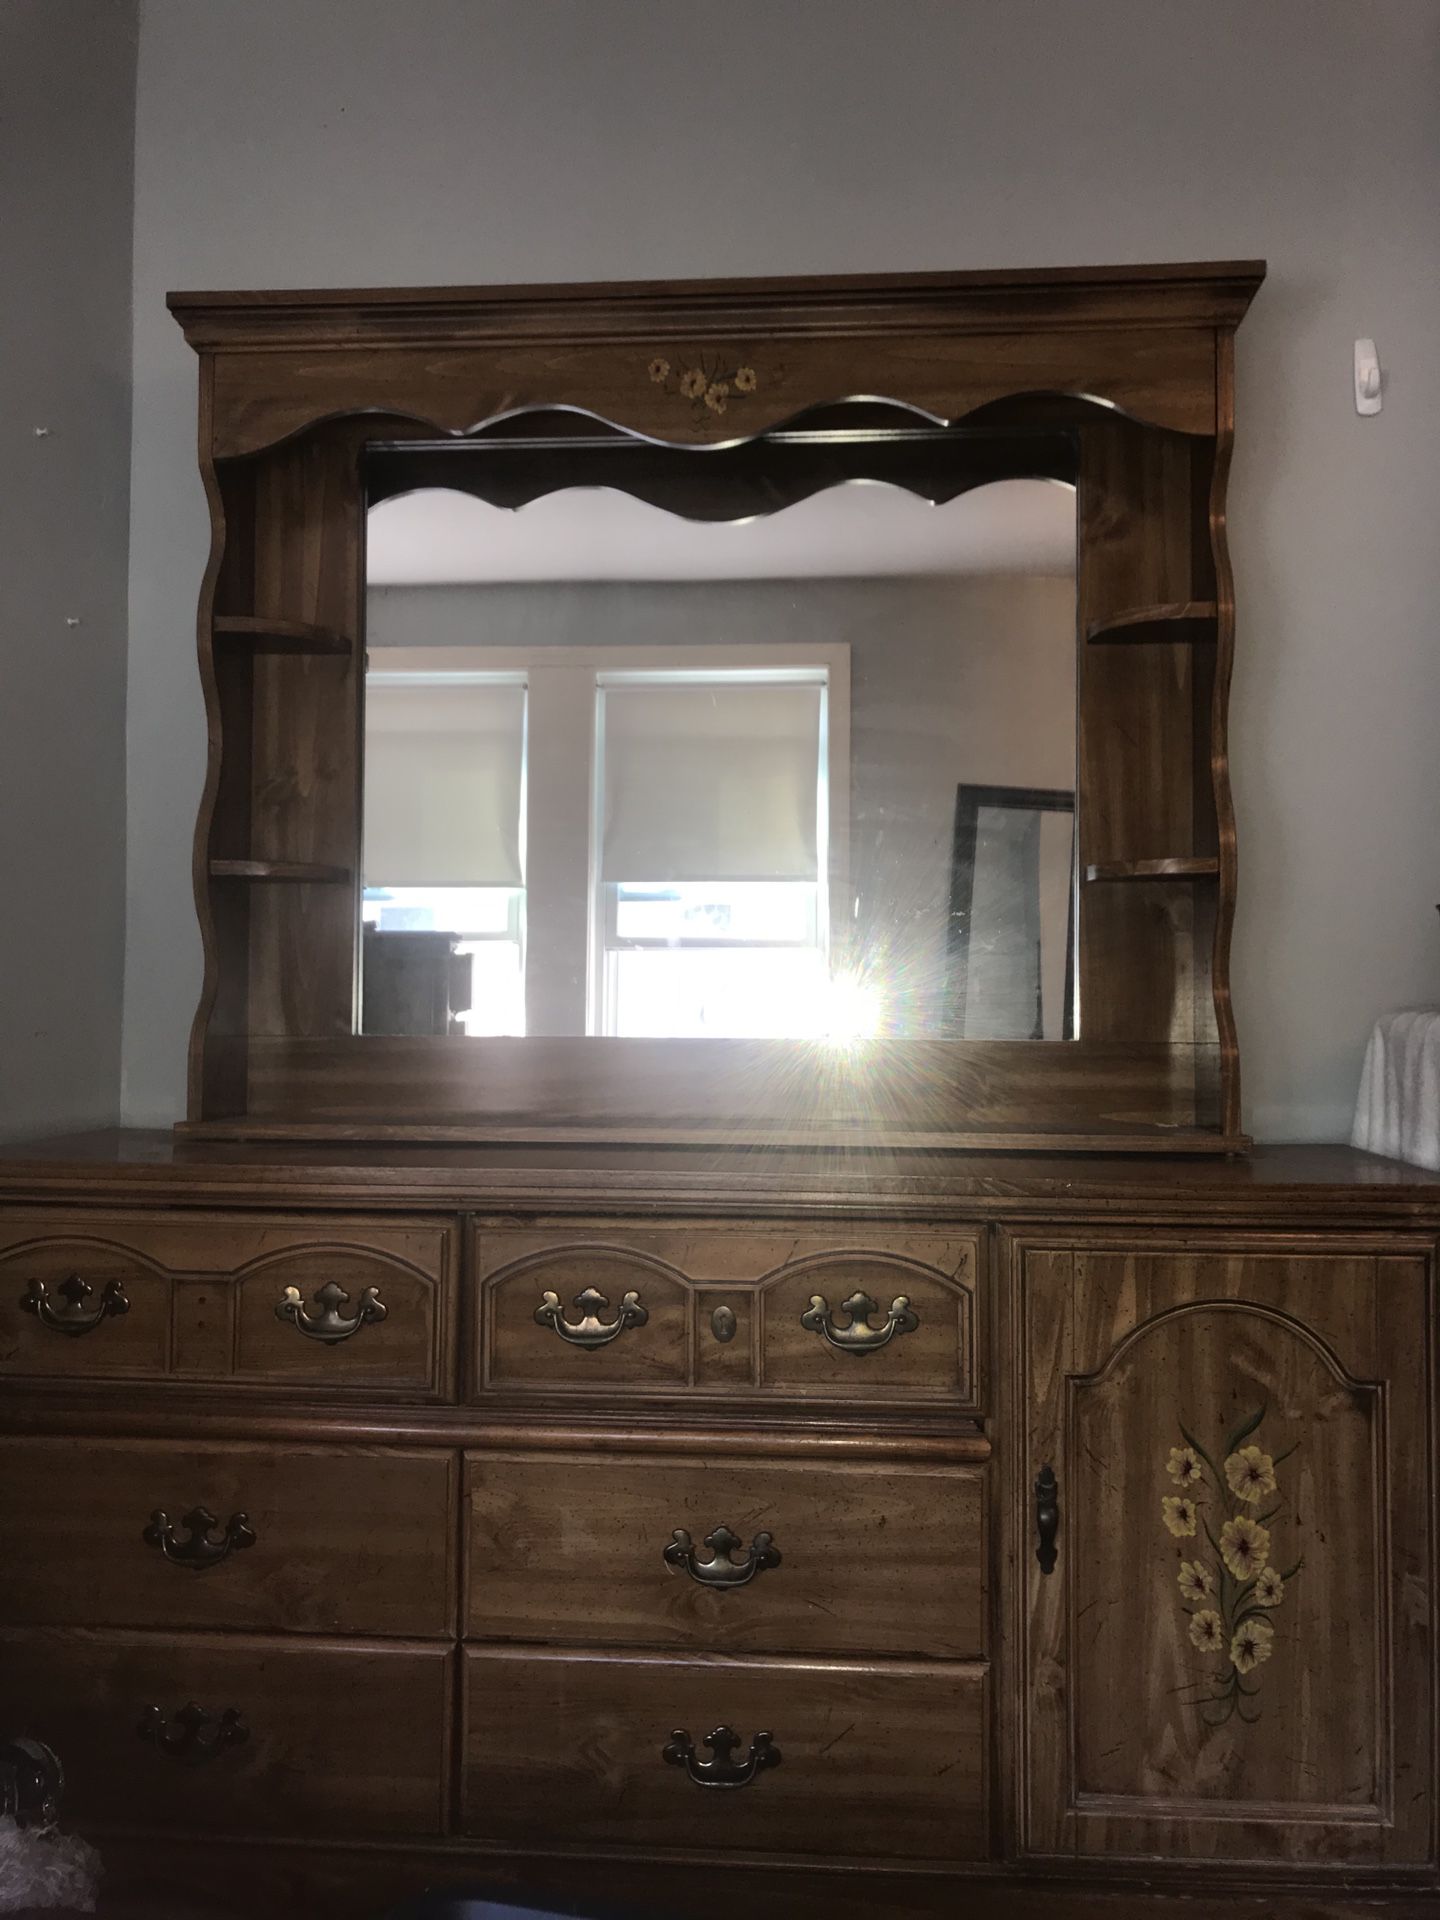 Dresser with large mirror.